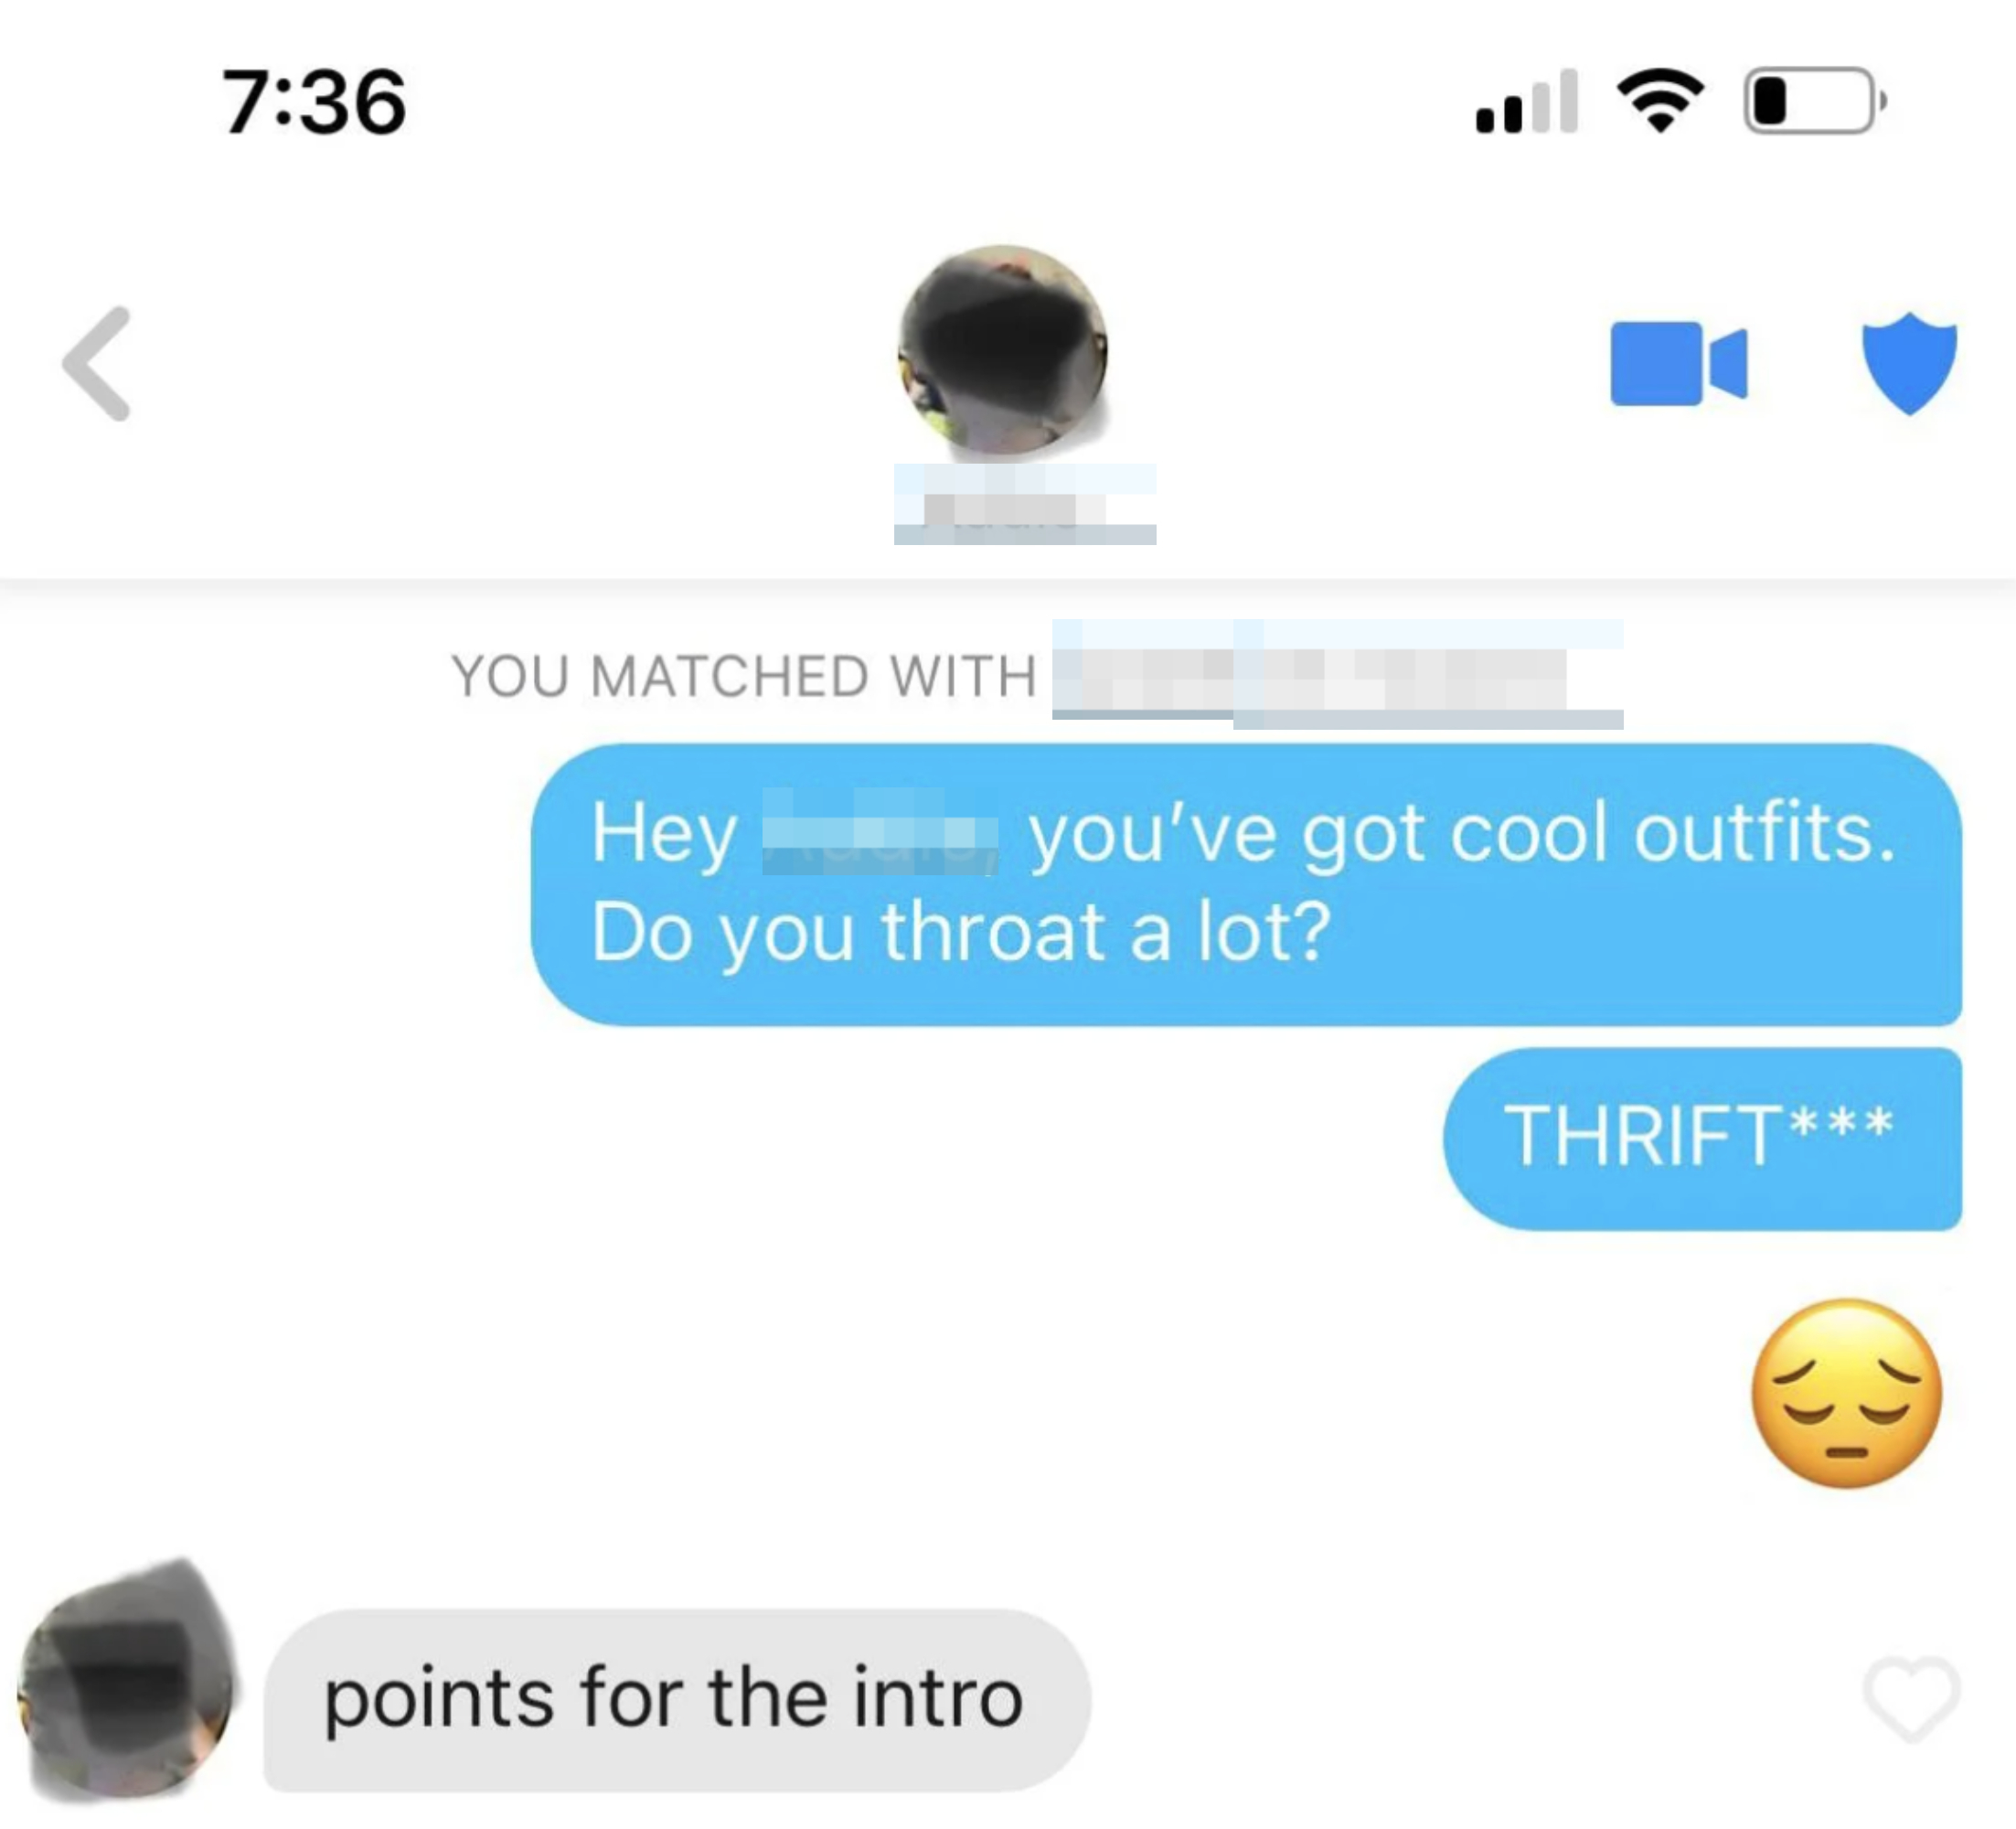 Dating app chat with Addie. Addie is complimented on outfits but asked an inappropriate question. Addie responds humorously with &quot;points for the intro.&quot;